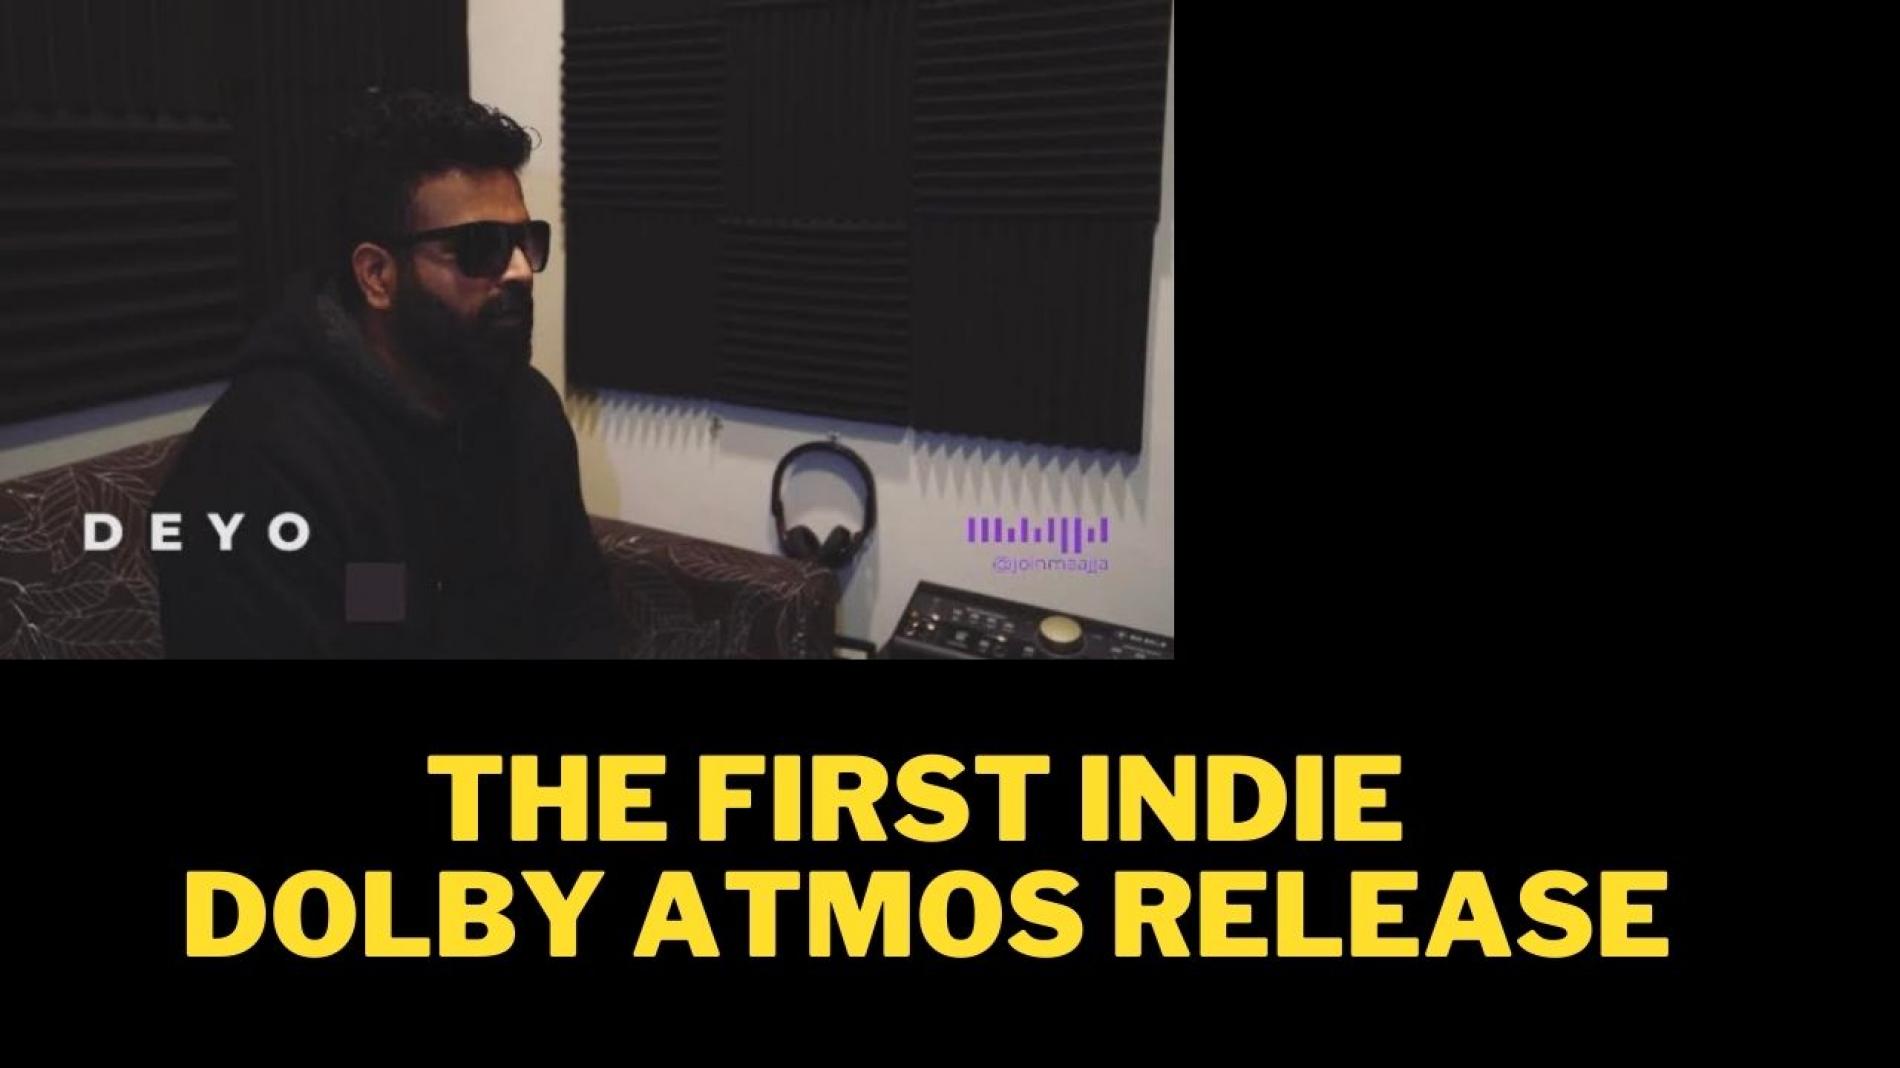 The World’s First Indie Dolby Atmos Release